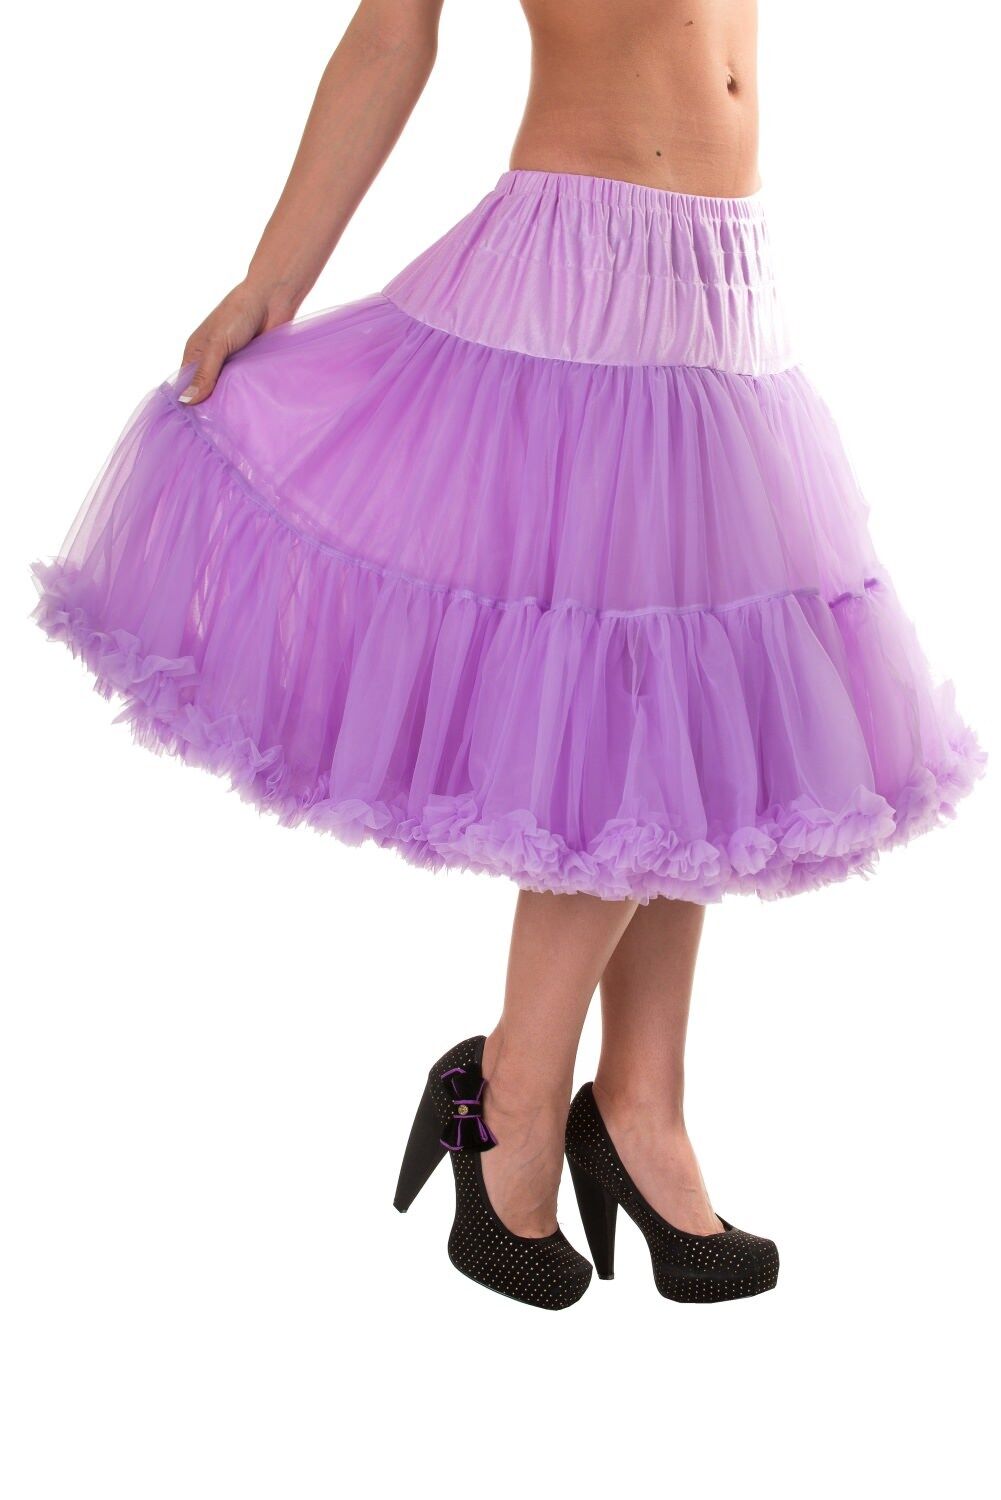 Dancing Days 50s Style 25"-27" Long Petticoat In Lavender